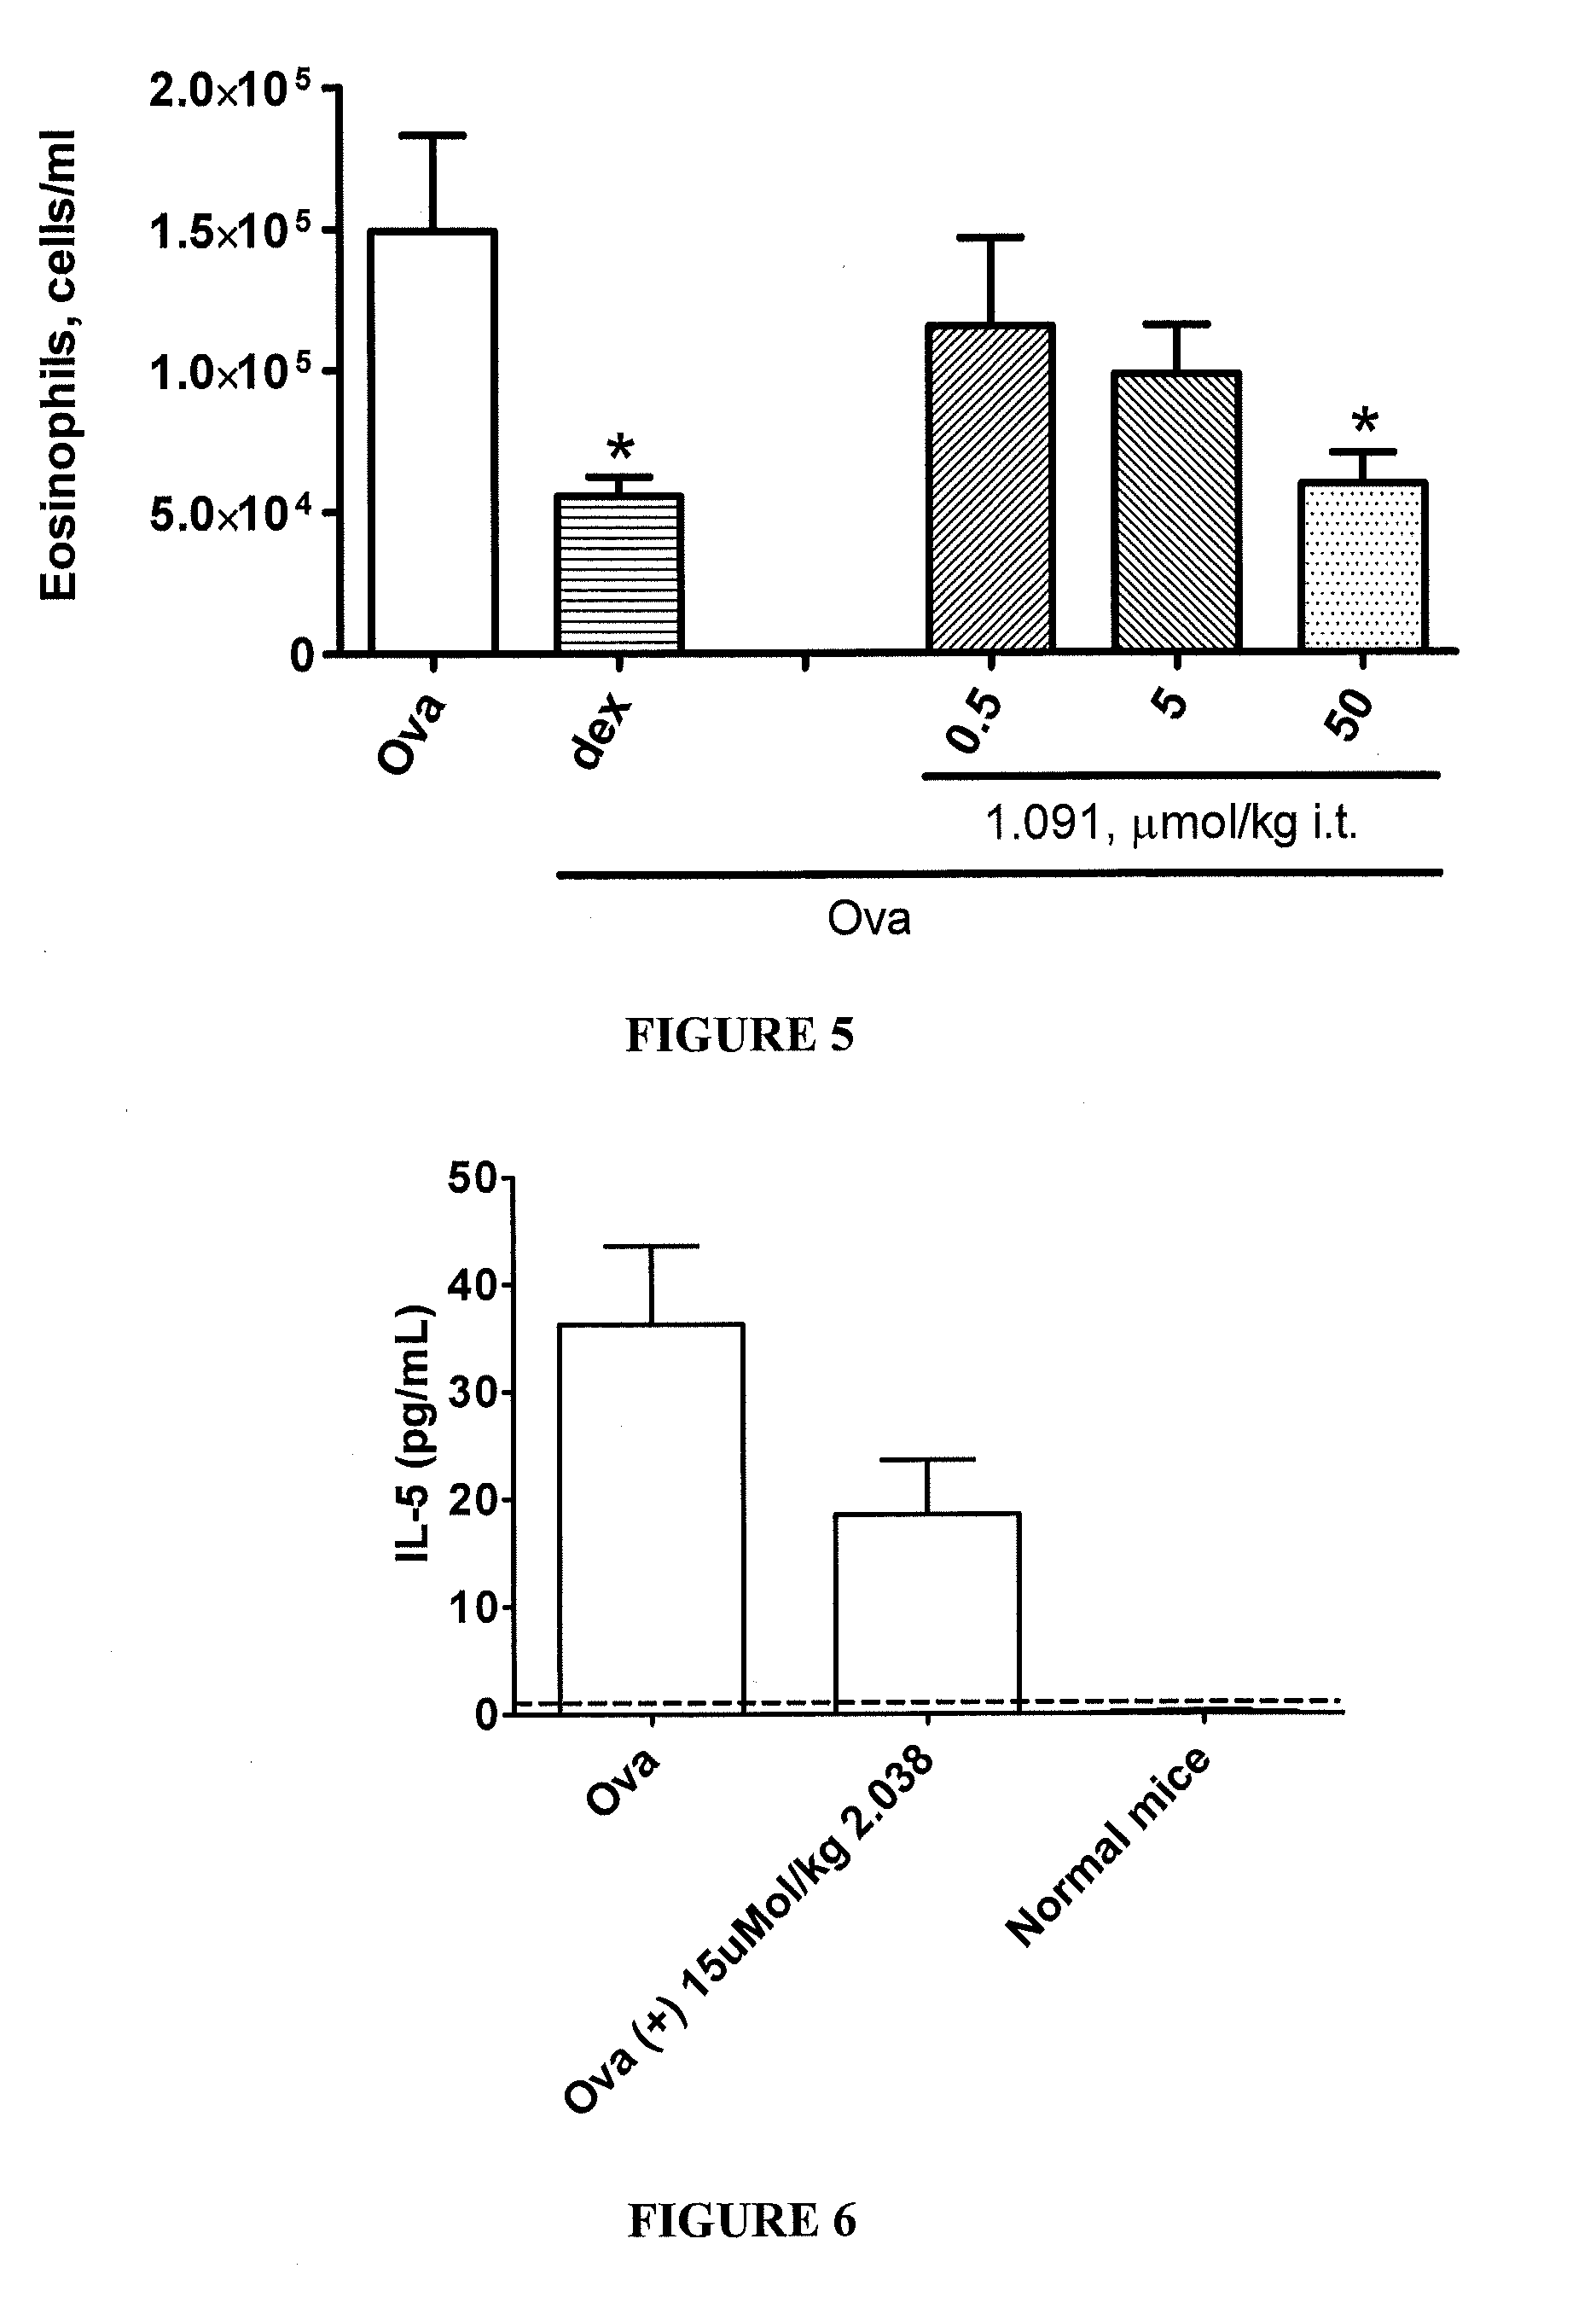 Method for treating diseases associated with alterations in cellular integrity using Rho kinase inhibitor compounds